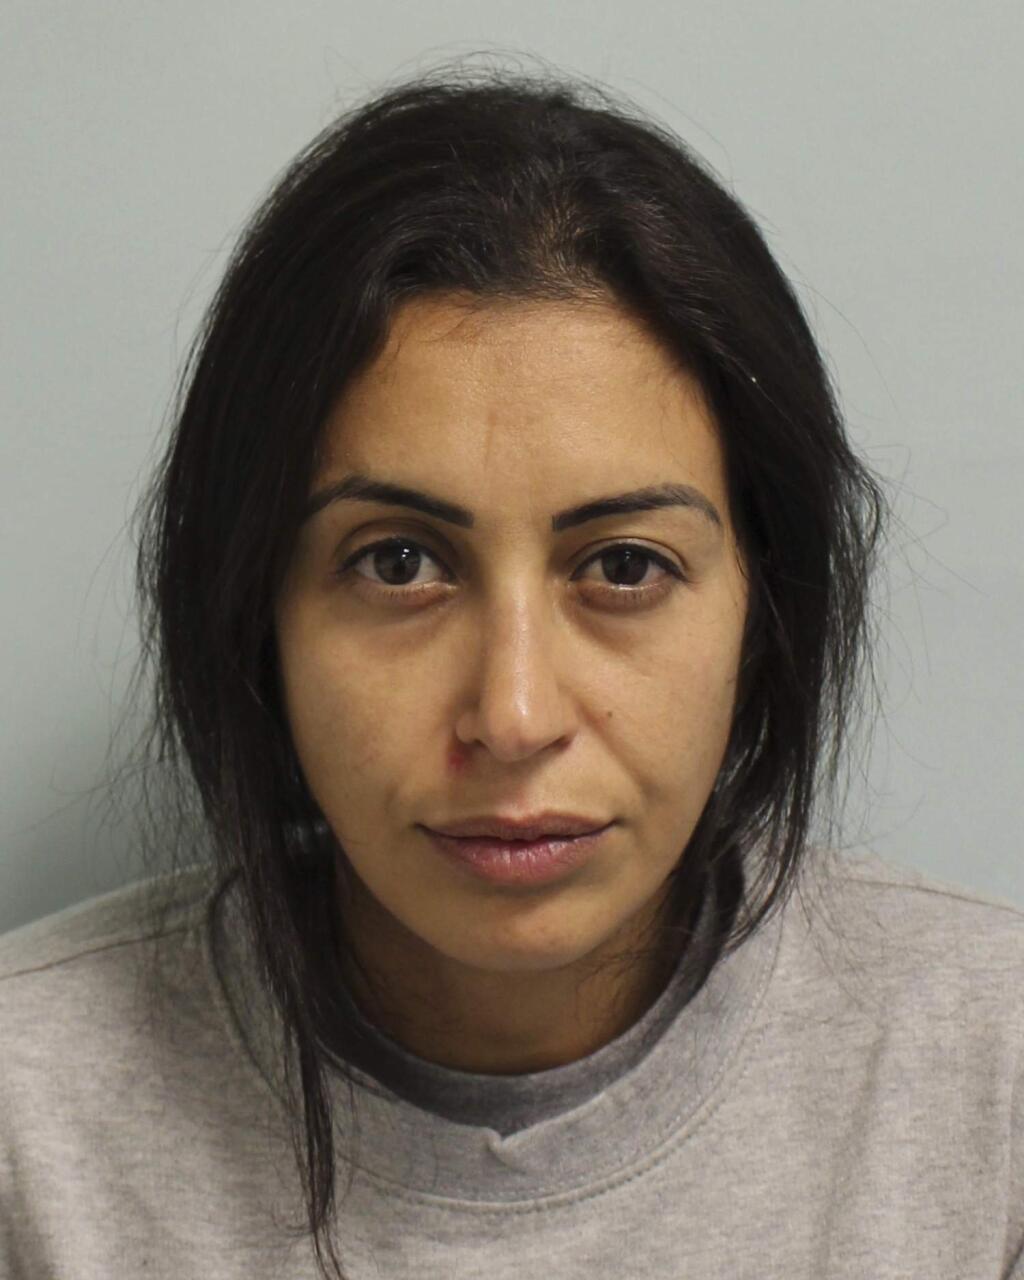 This undated Metropolitan Police photo shows Sabrina Kouider. A jury at London's Central Criminal Court convicted 40-year-old Ouissem Medouni and 35-year-old Sabrina Kouider on Thursday May 24, 2018 after six days of deliberation. The couple were found guilty of murdering their French nanny and burning her body on a bonfire in their London backyard. (Metropolitan Police via AP)